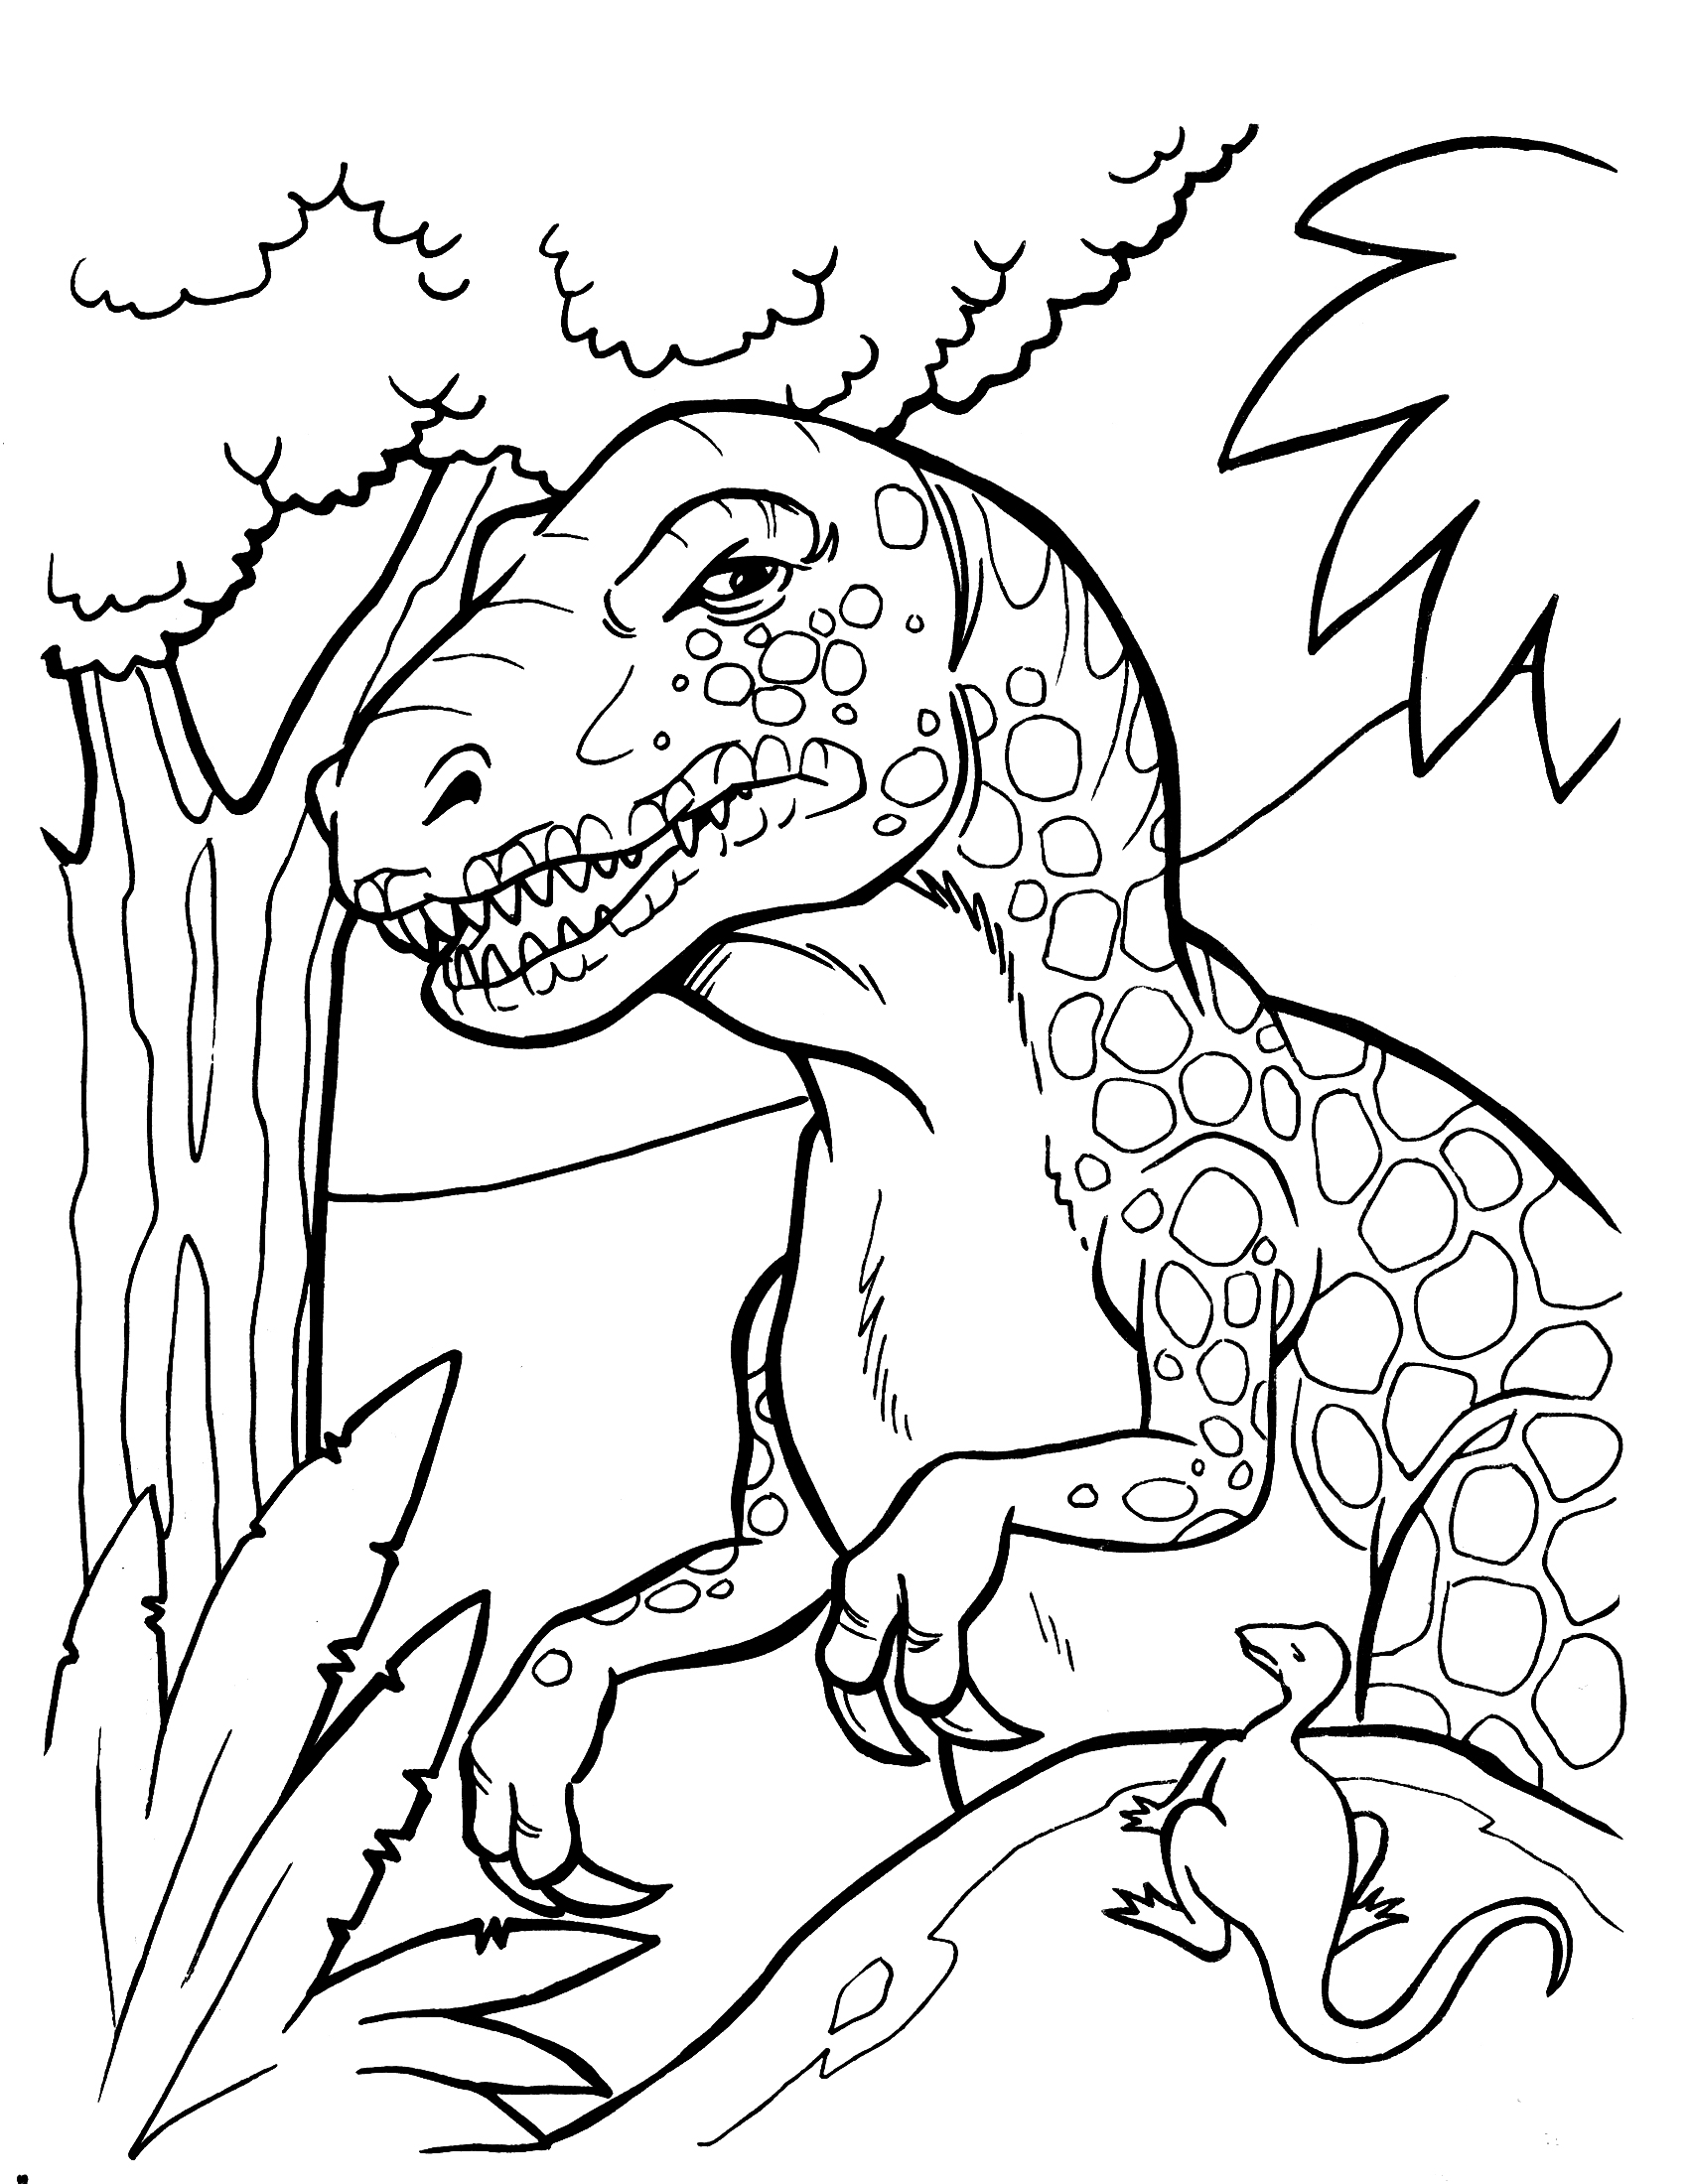 Big Dinosaur Coloring Pages | Coloring pages for Boys Free ...